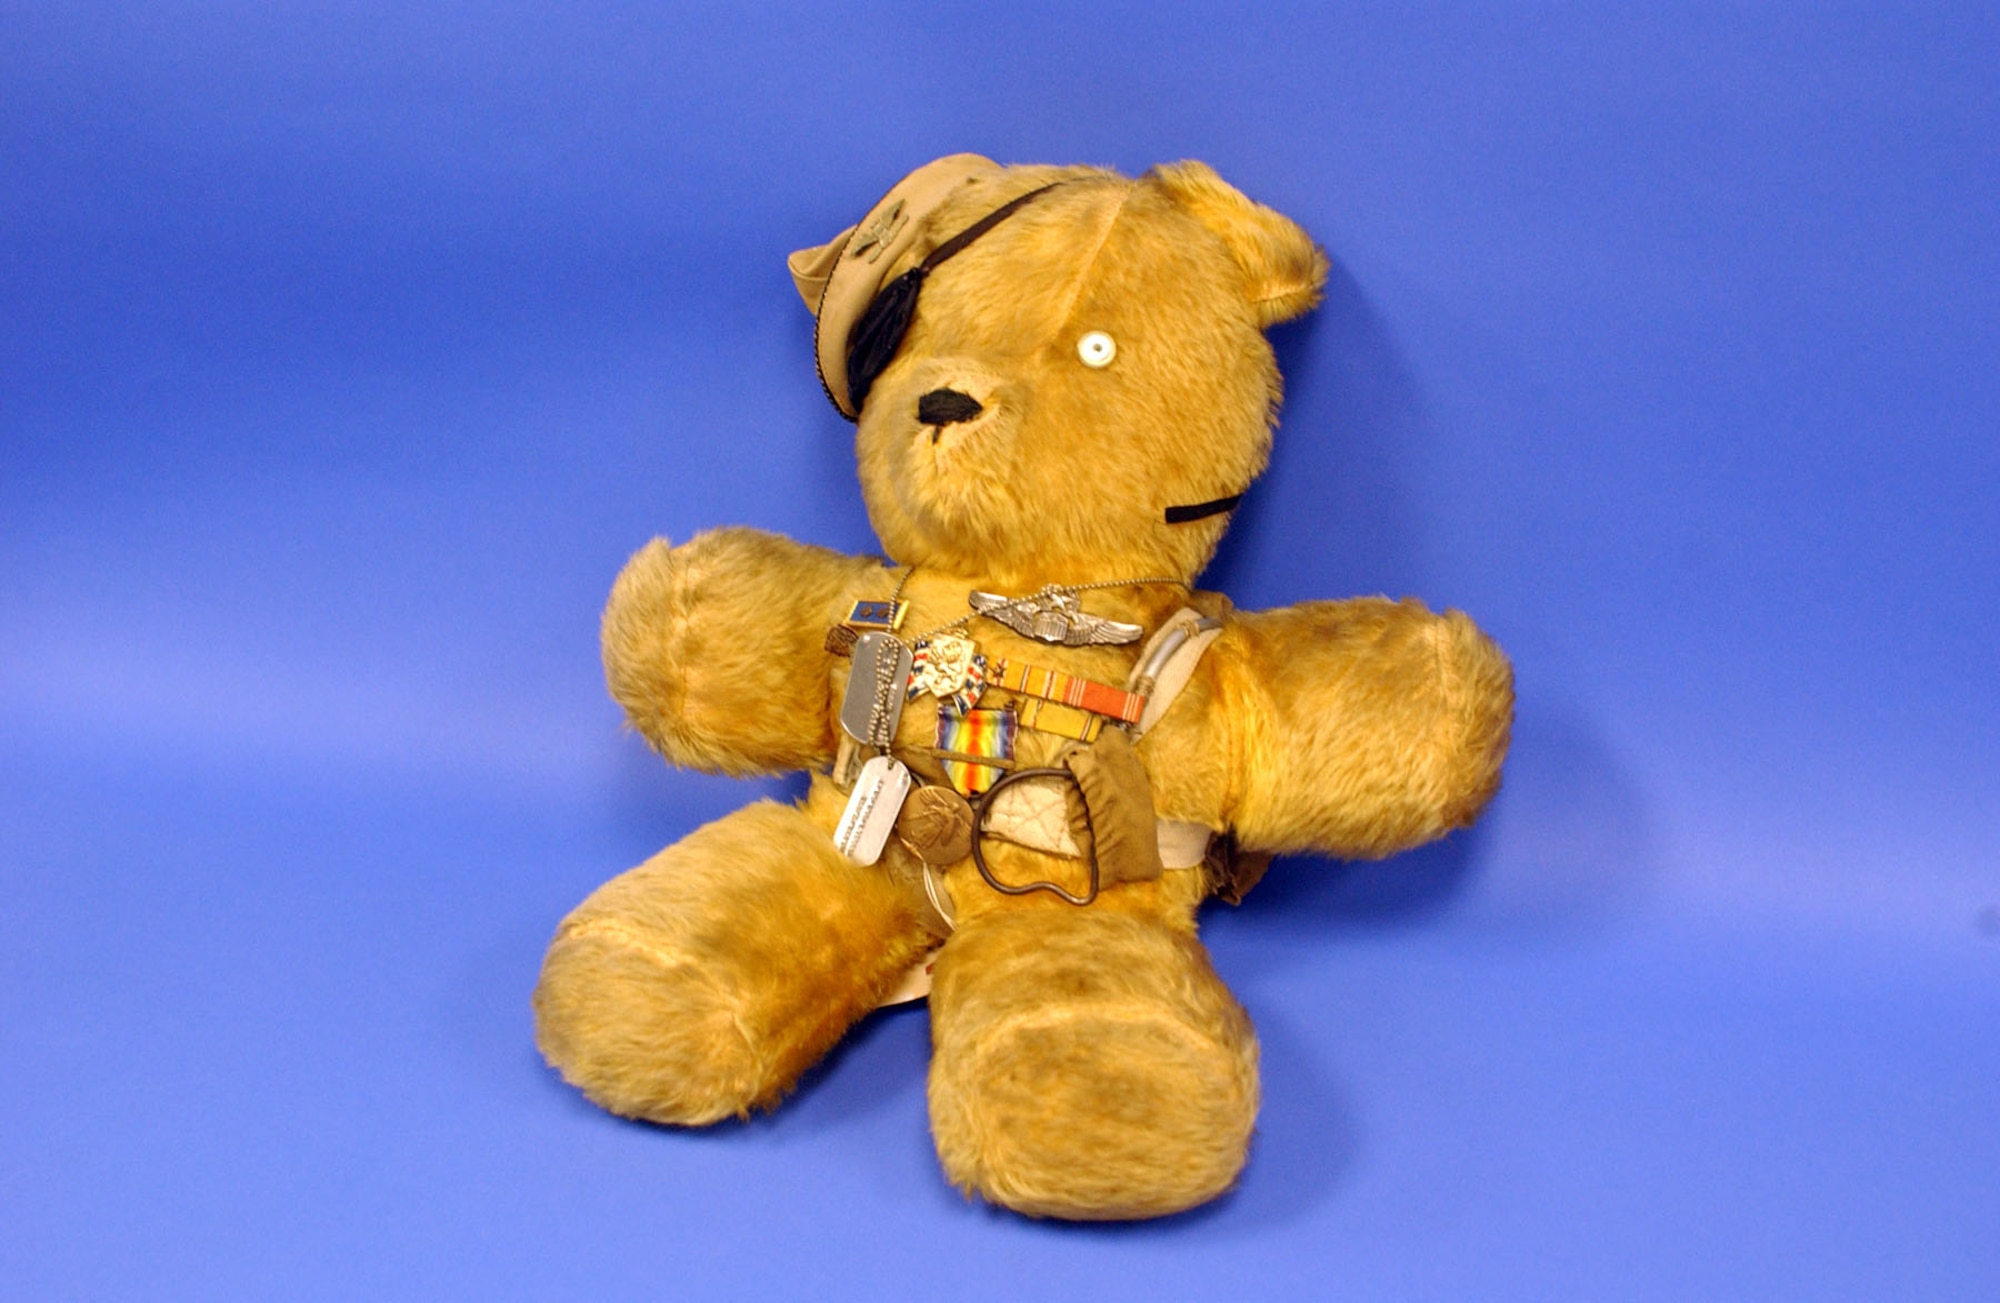 The Col. Elmer E. Elmer teddy bear was the mascot for the crew of the B-29 "Deacon Disciples," which was the aircraft broke that the Hawaii-to-Washington non-stop record of 17 hours, 21 minutes. (U.S. Air Force photo)